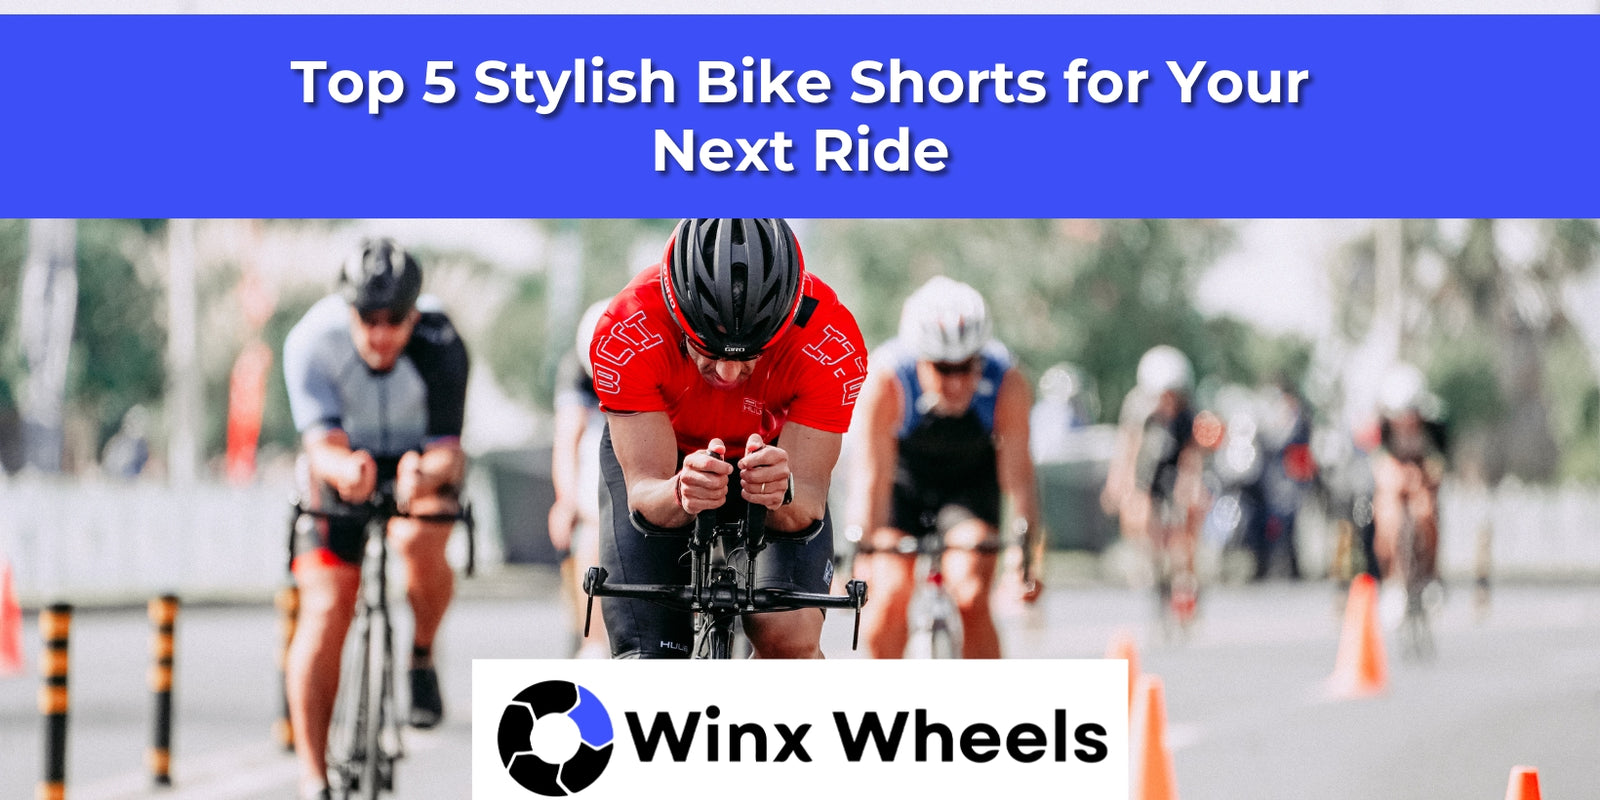 Top 5 Stylish Bike Shorts for Your Next Ride